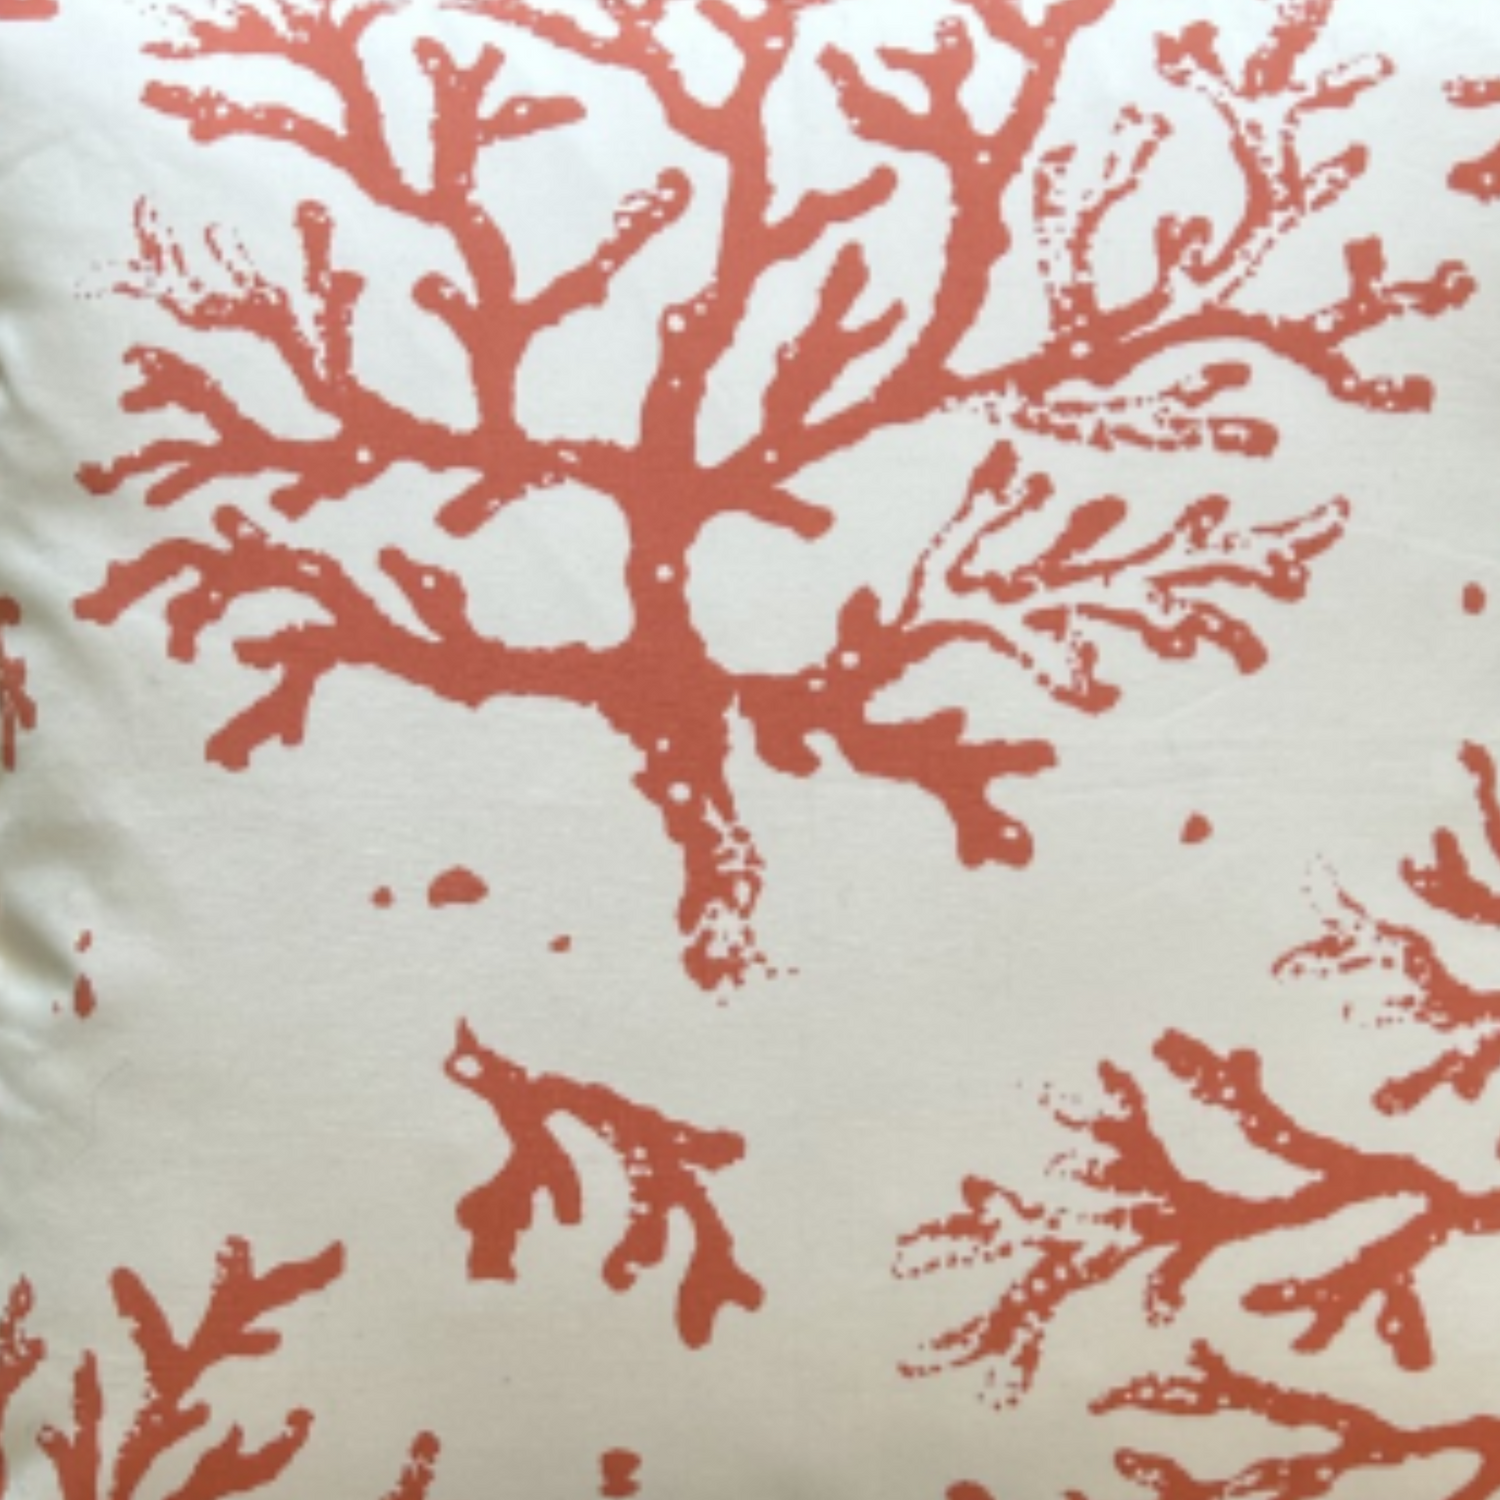 Dramatic Natural Coral Italian Cotton Print 16 x 16 Designer Pillow with Down Feather Insert